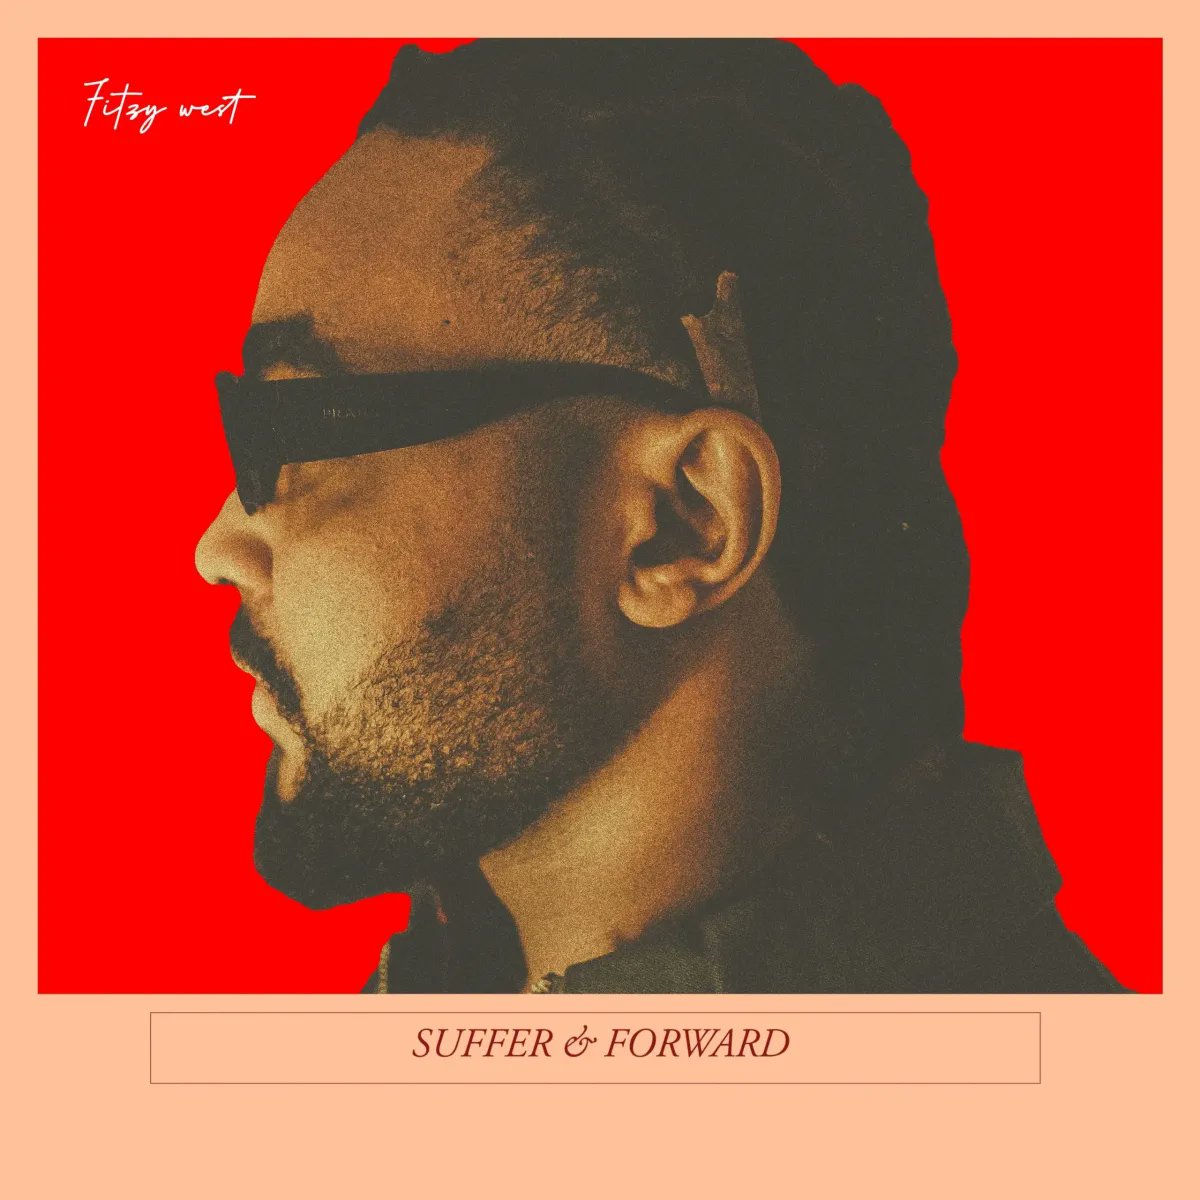 #DriveTimeShow With @cassyy_george X @Marlbeatfm #NP ''Forward '' @only1fitzy #Talktuesday #Thebeat999ph